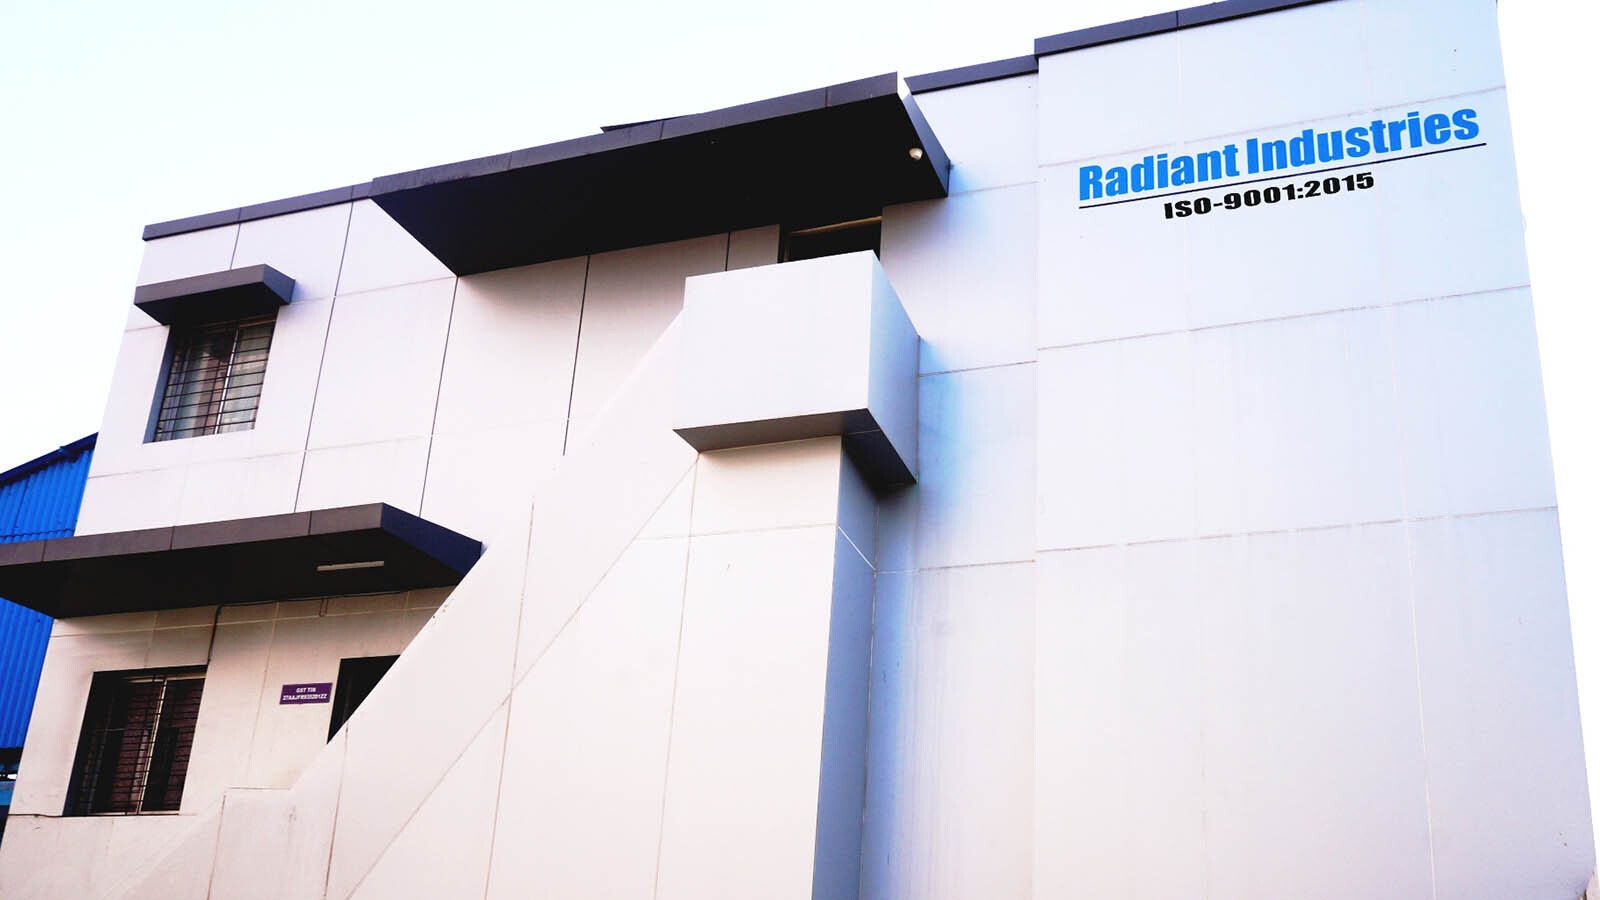 Radiant Industries, based in California, wants to build portable micro-nuclear power plants and has selected Wyoming as a finalist for a factory.